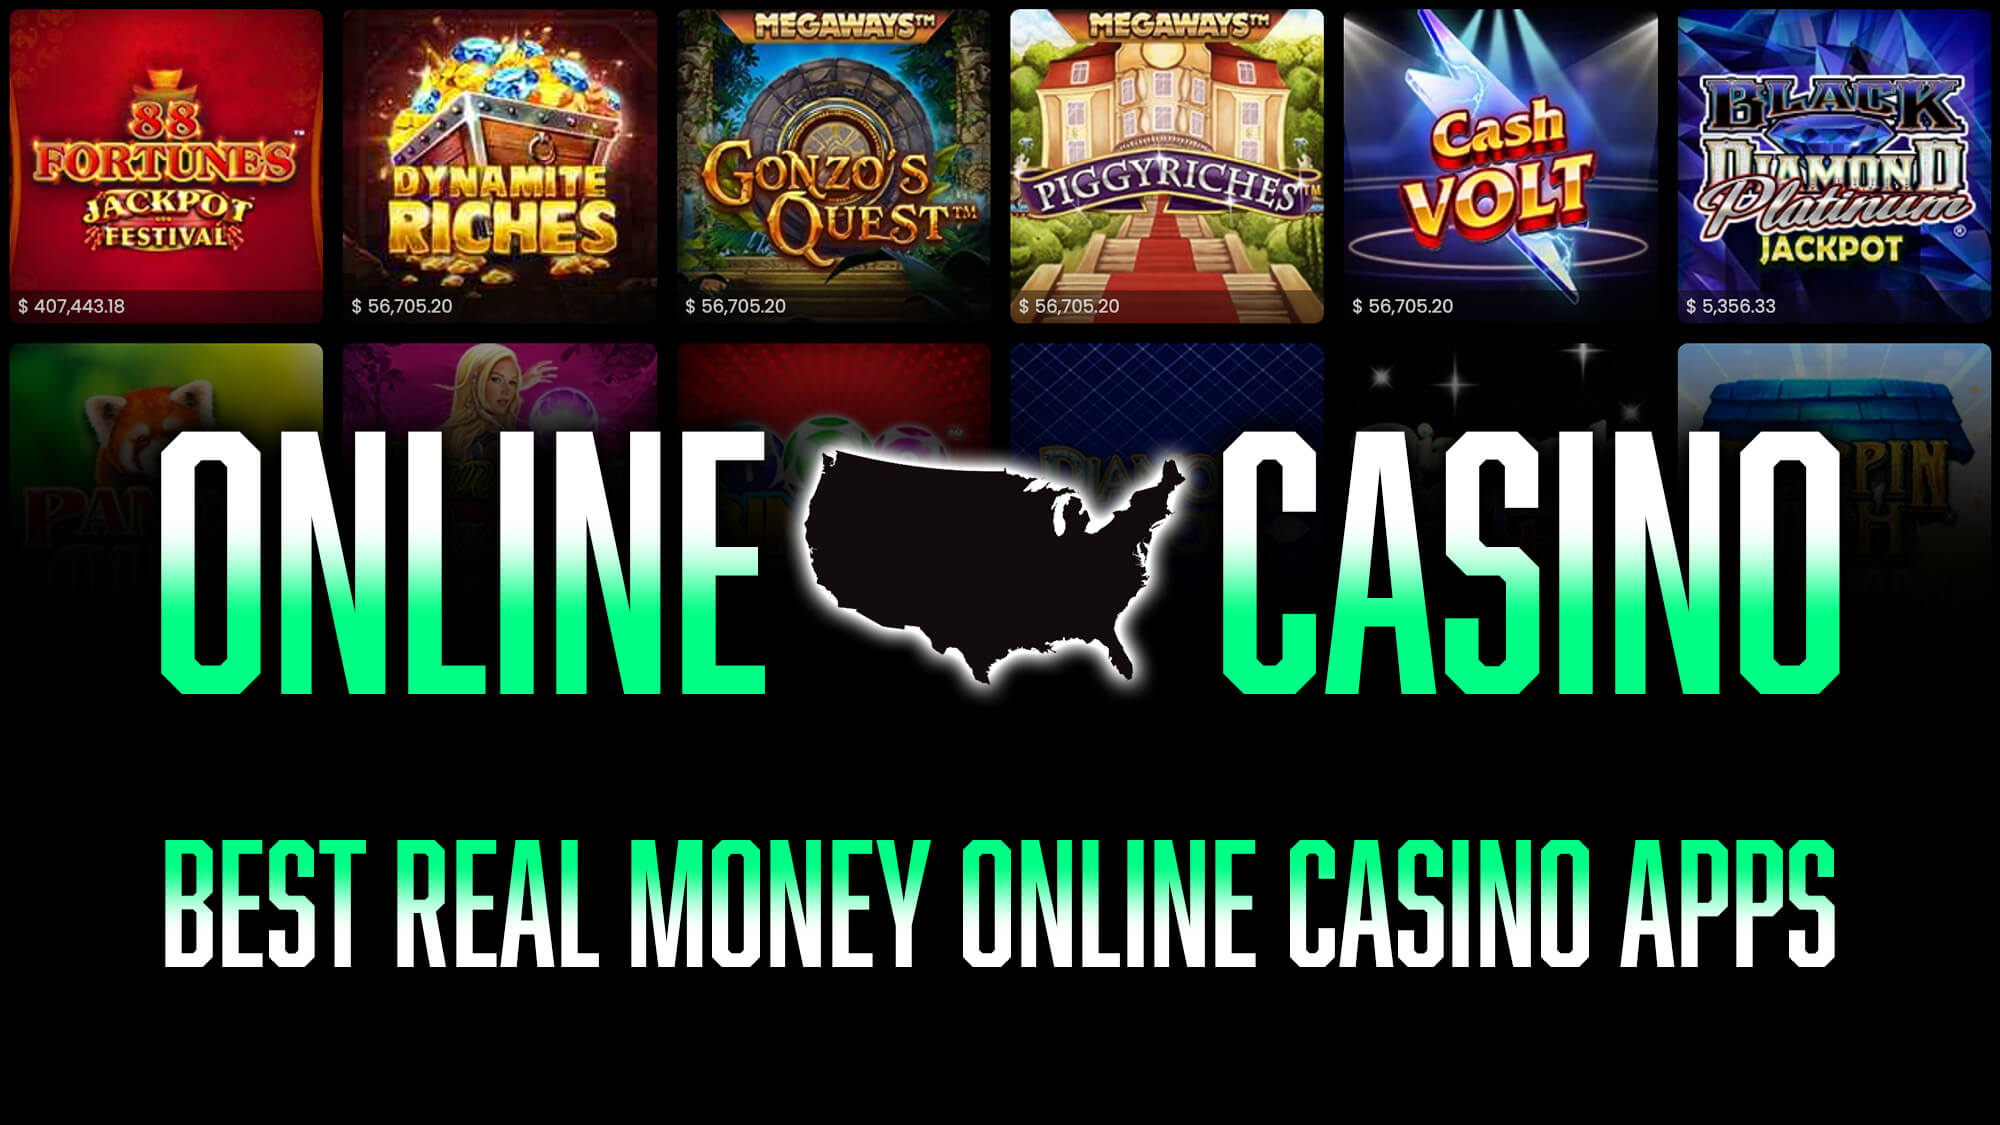 15 Lessons About the best online casinos You Need To Learn To Succeed